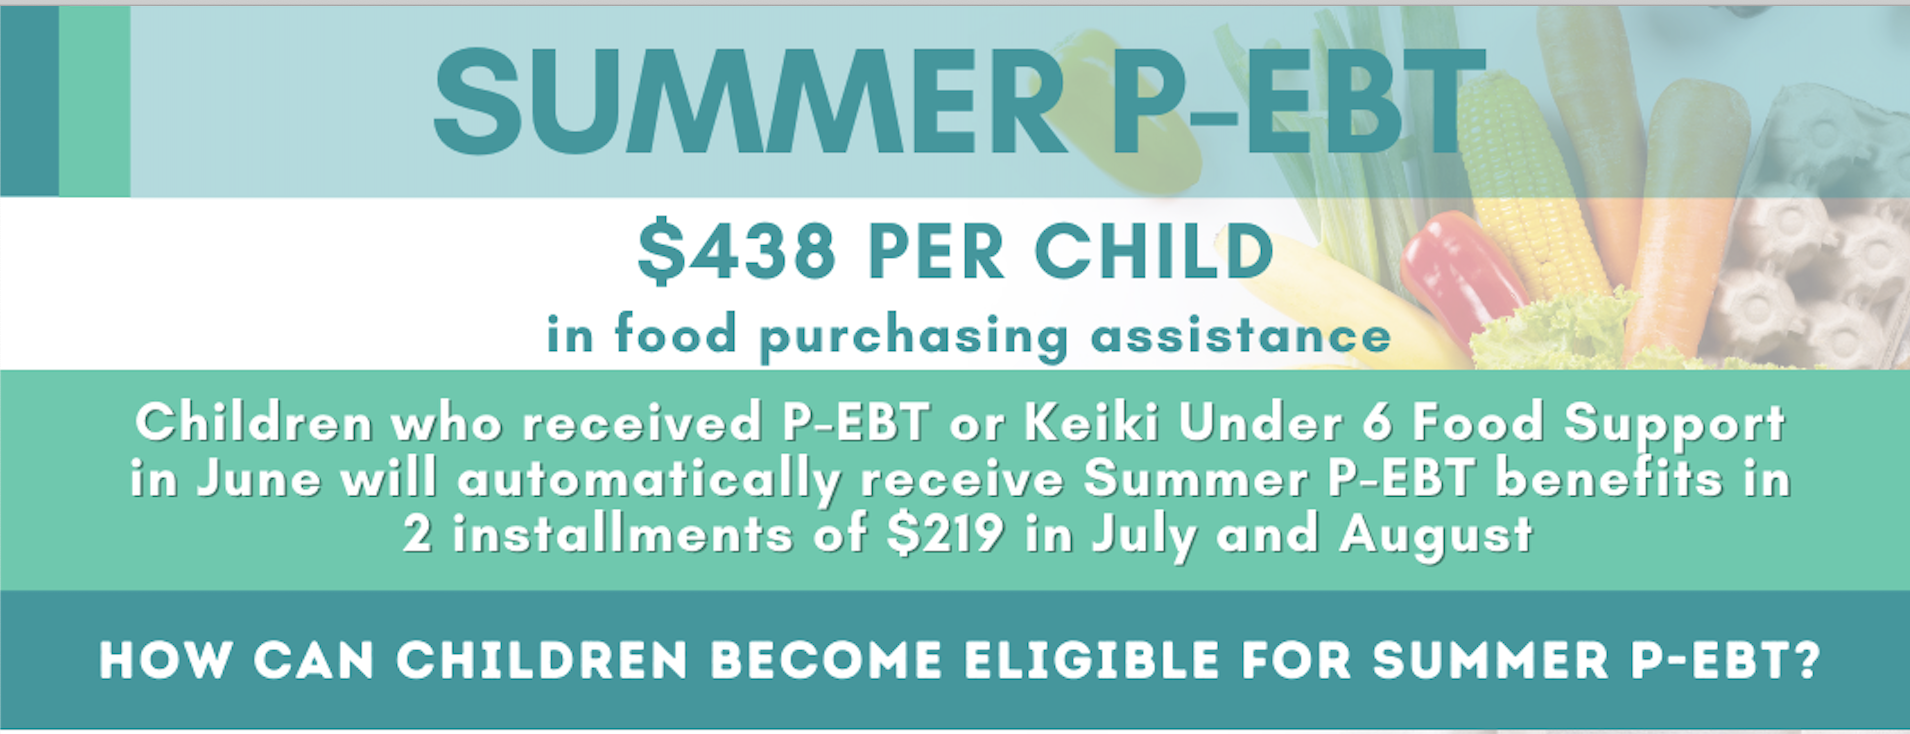 Department of Human Services SUMMER PEBT BENEFITS BEGIN TO ROLLOUT